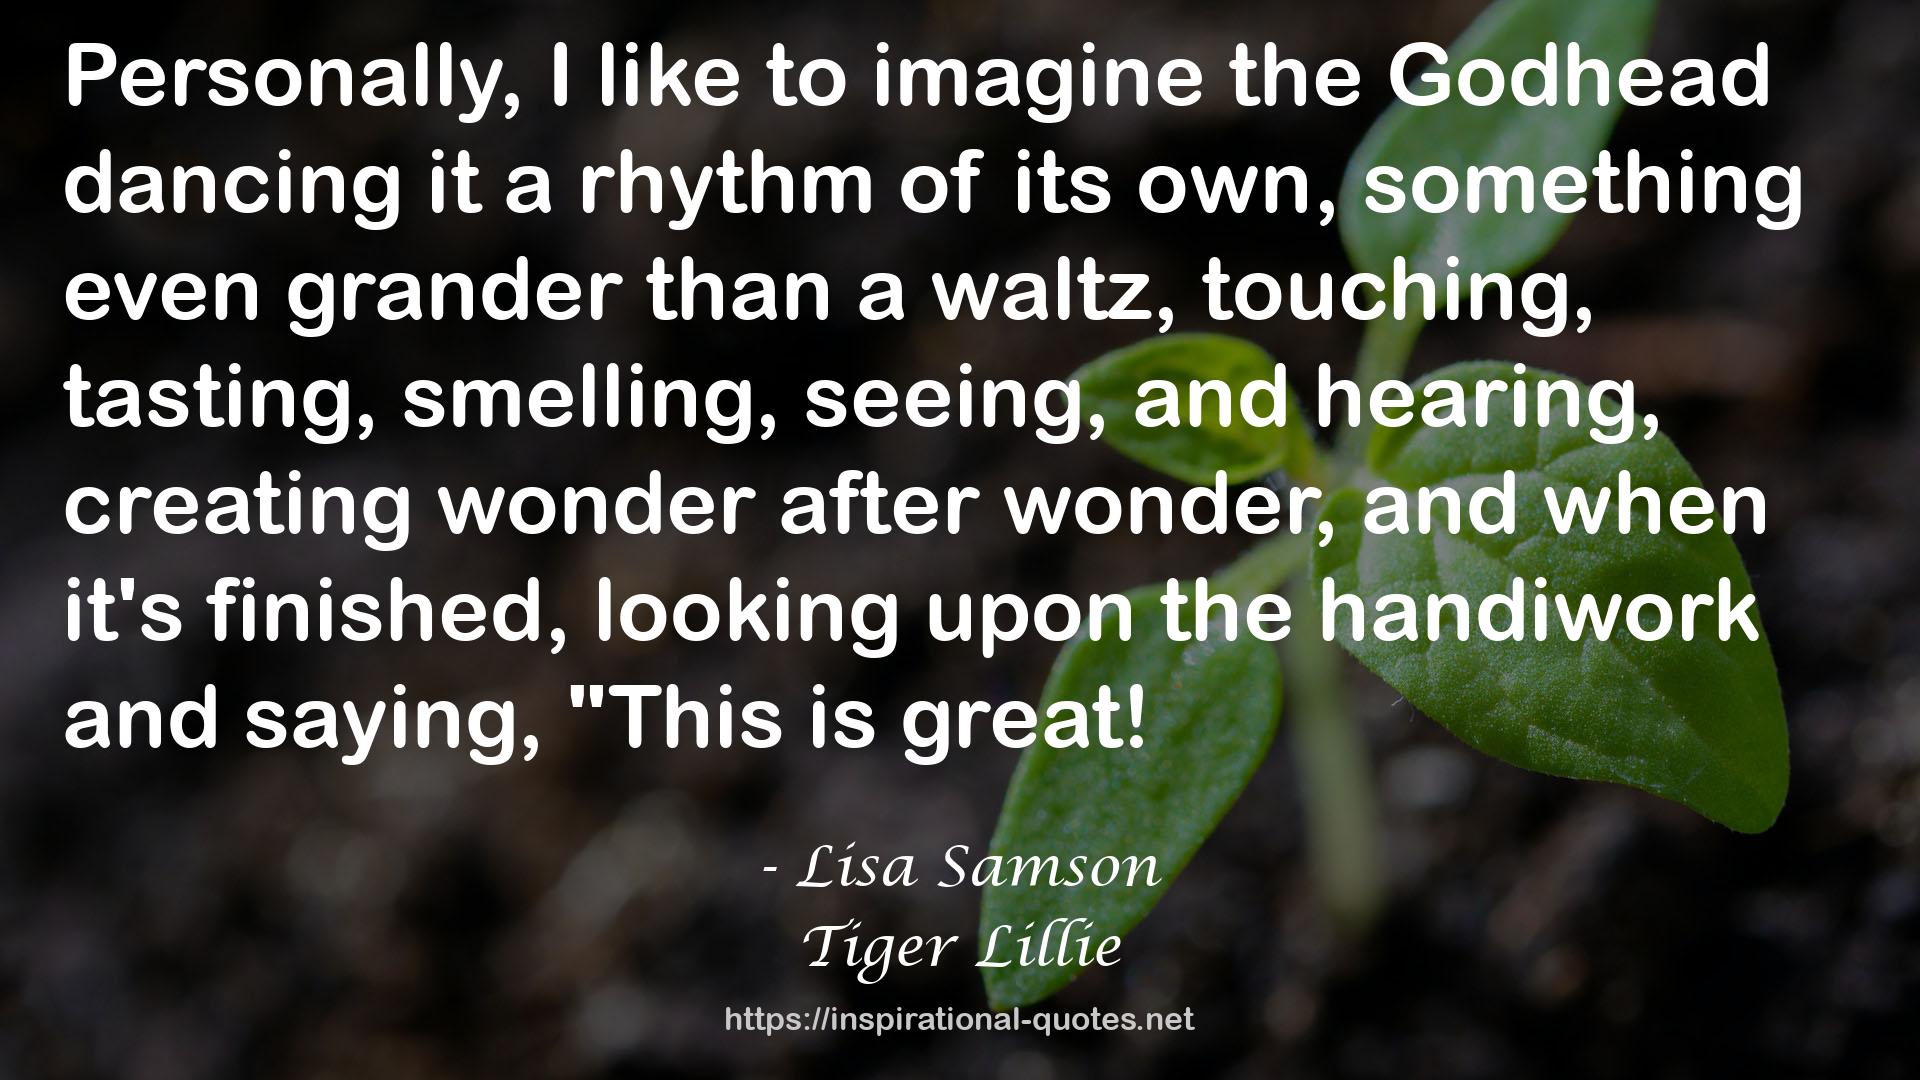 Tiger Lillie QUOTES